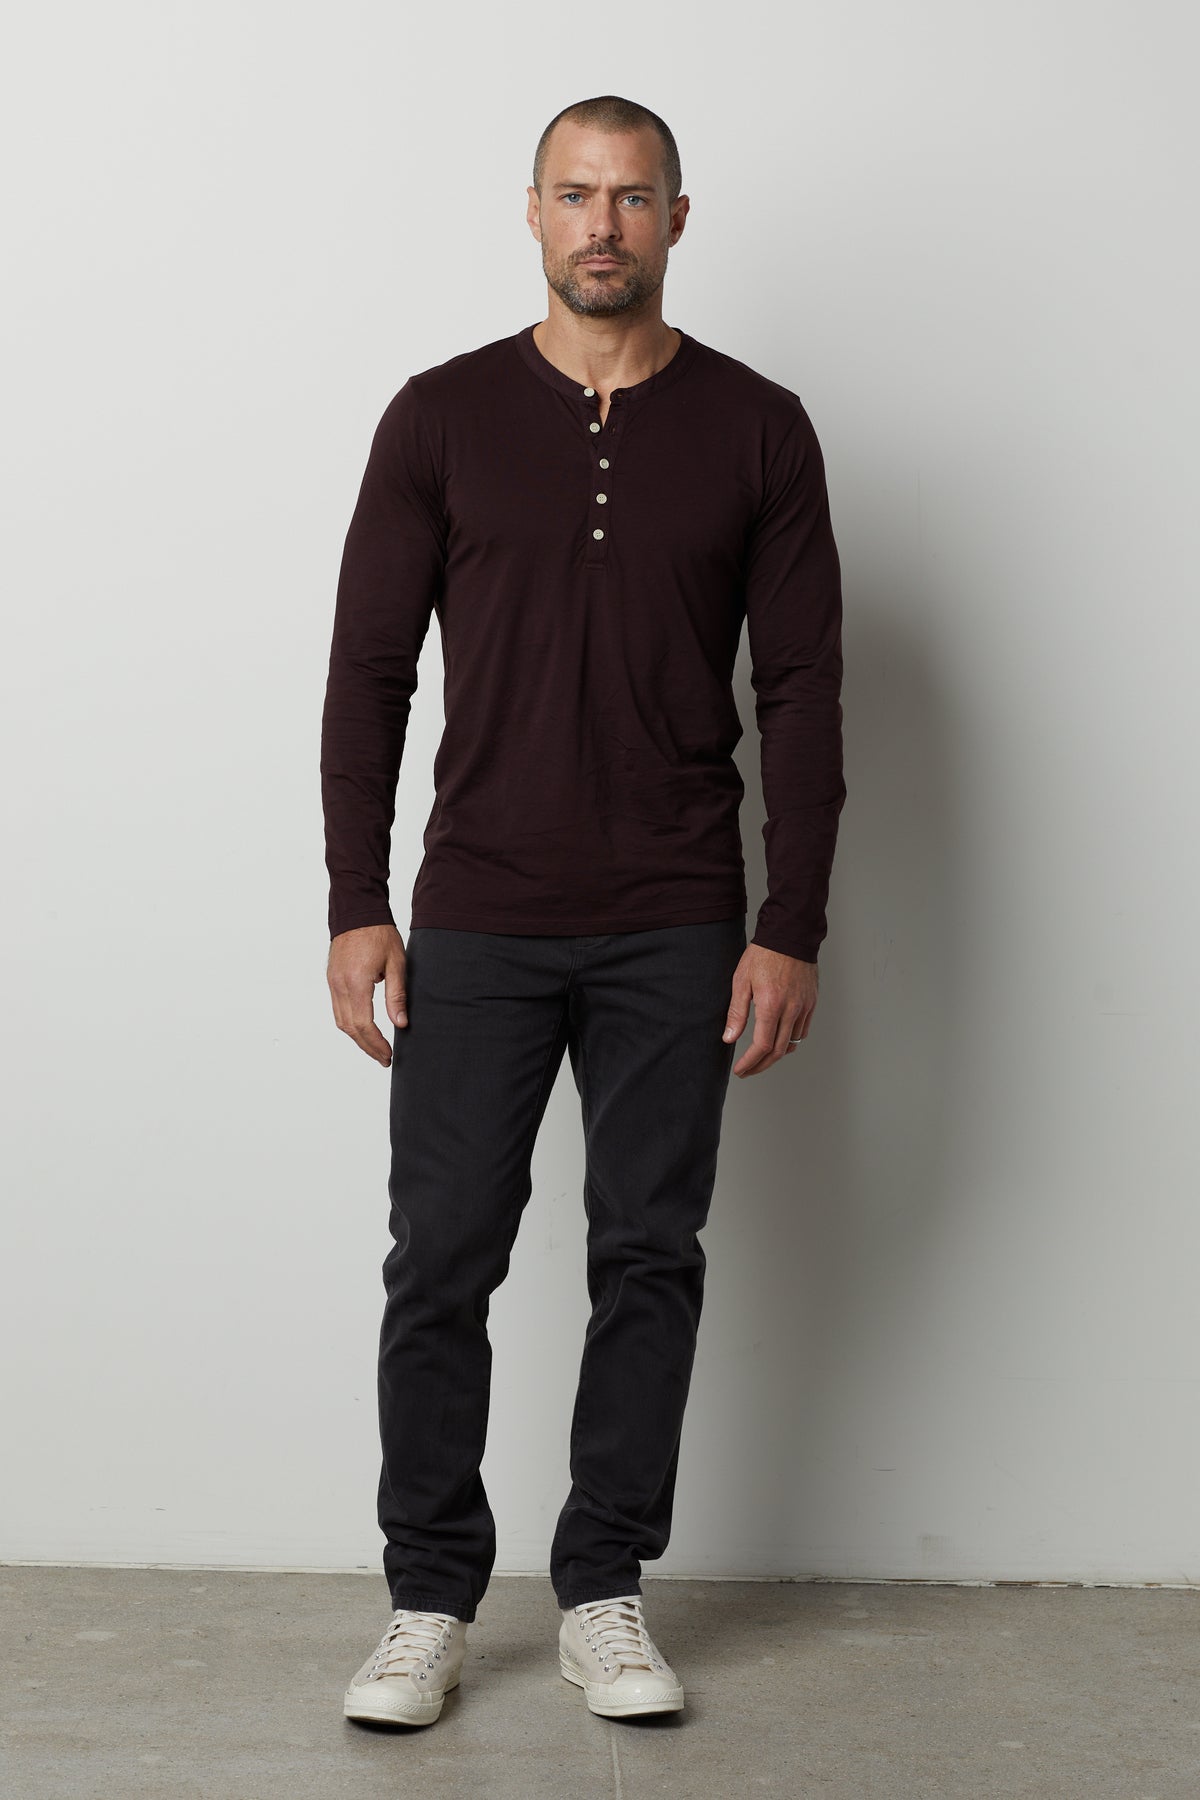   A man wearing a lightweight Alvaro Cotton Jersey Henley shirt by Velvet by Graham & Spencer and vintage-look black pants. 